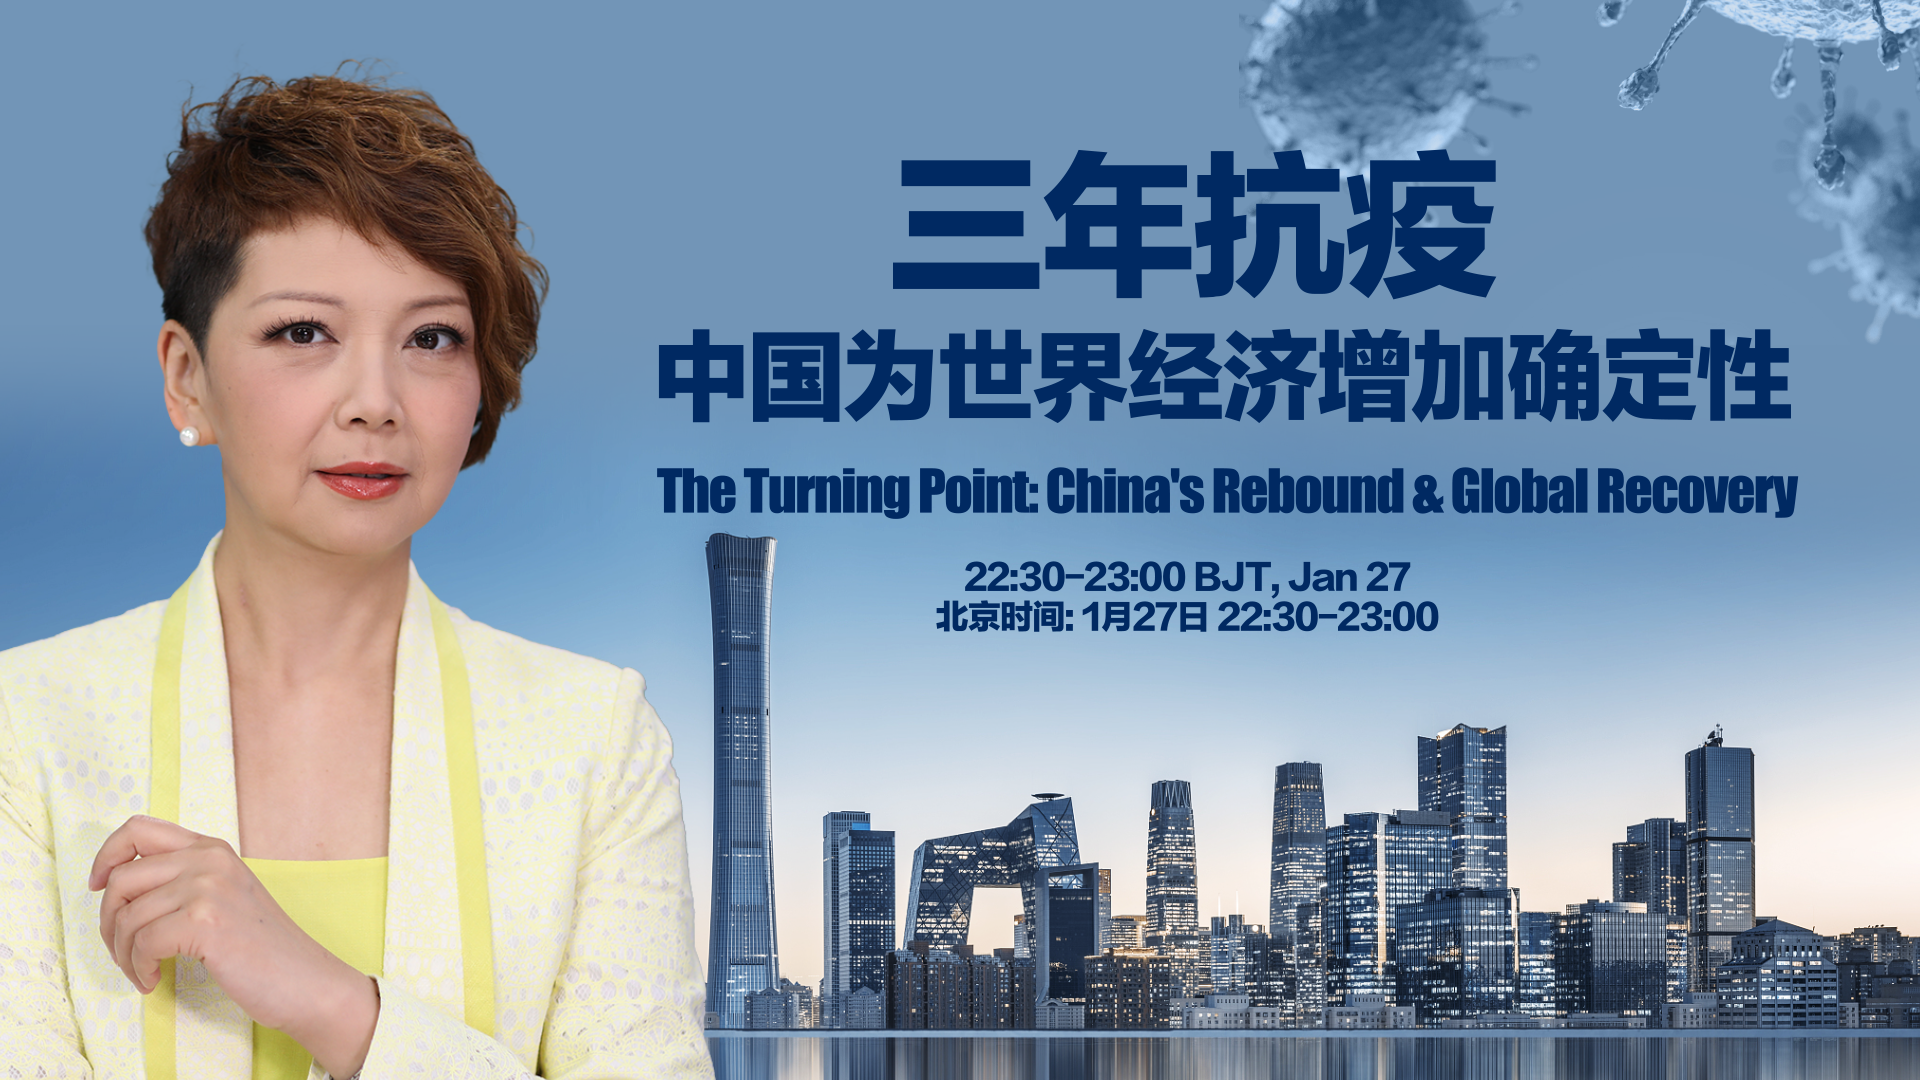 Watch: The Turning Point - China's Rebound & Global Recovery